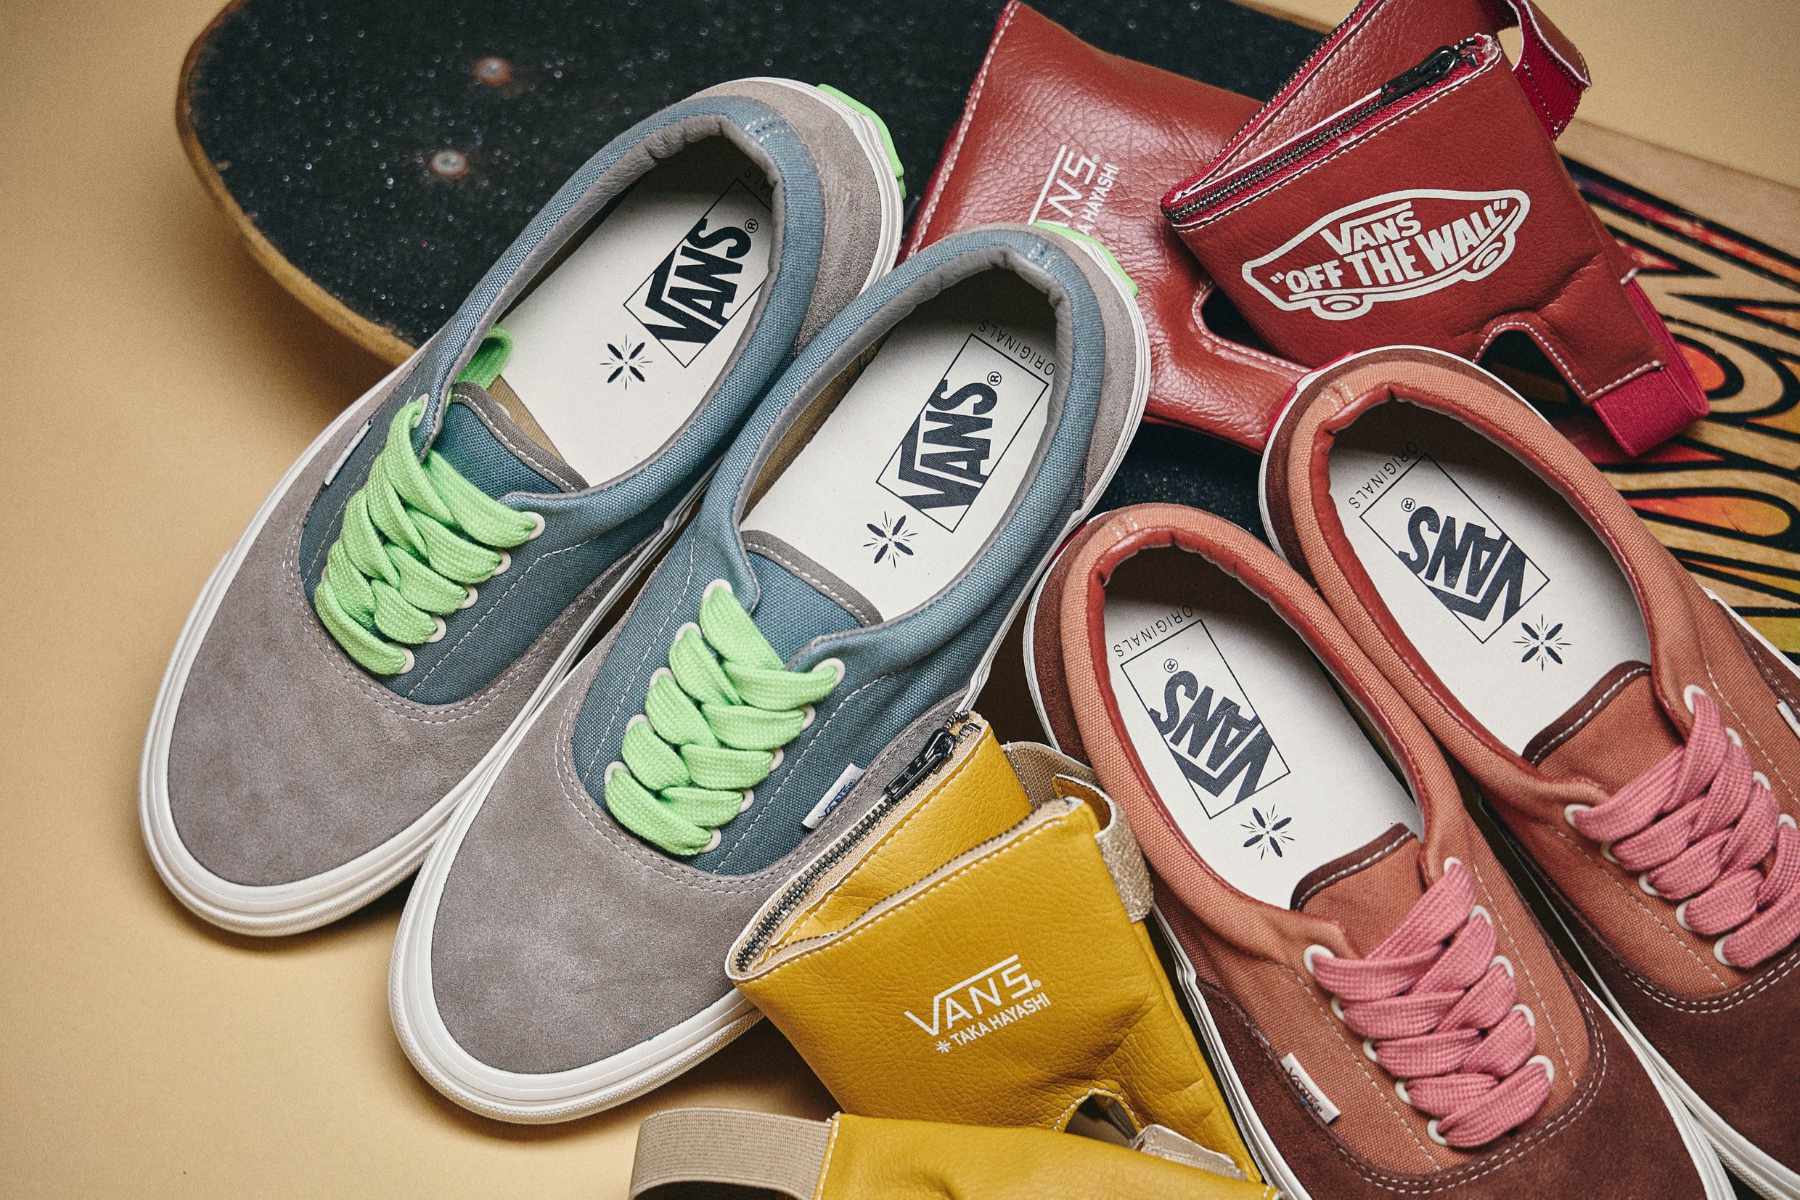 Vans' New Era Sneakers Come With Removable Ankle Guards